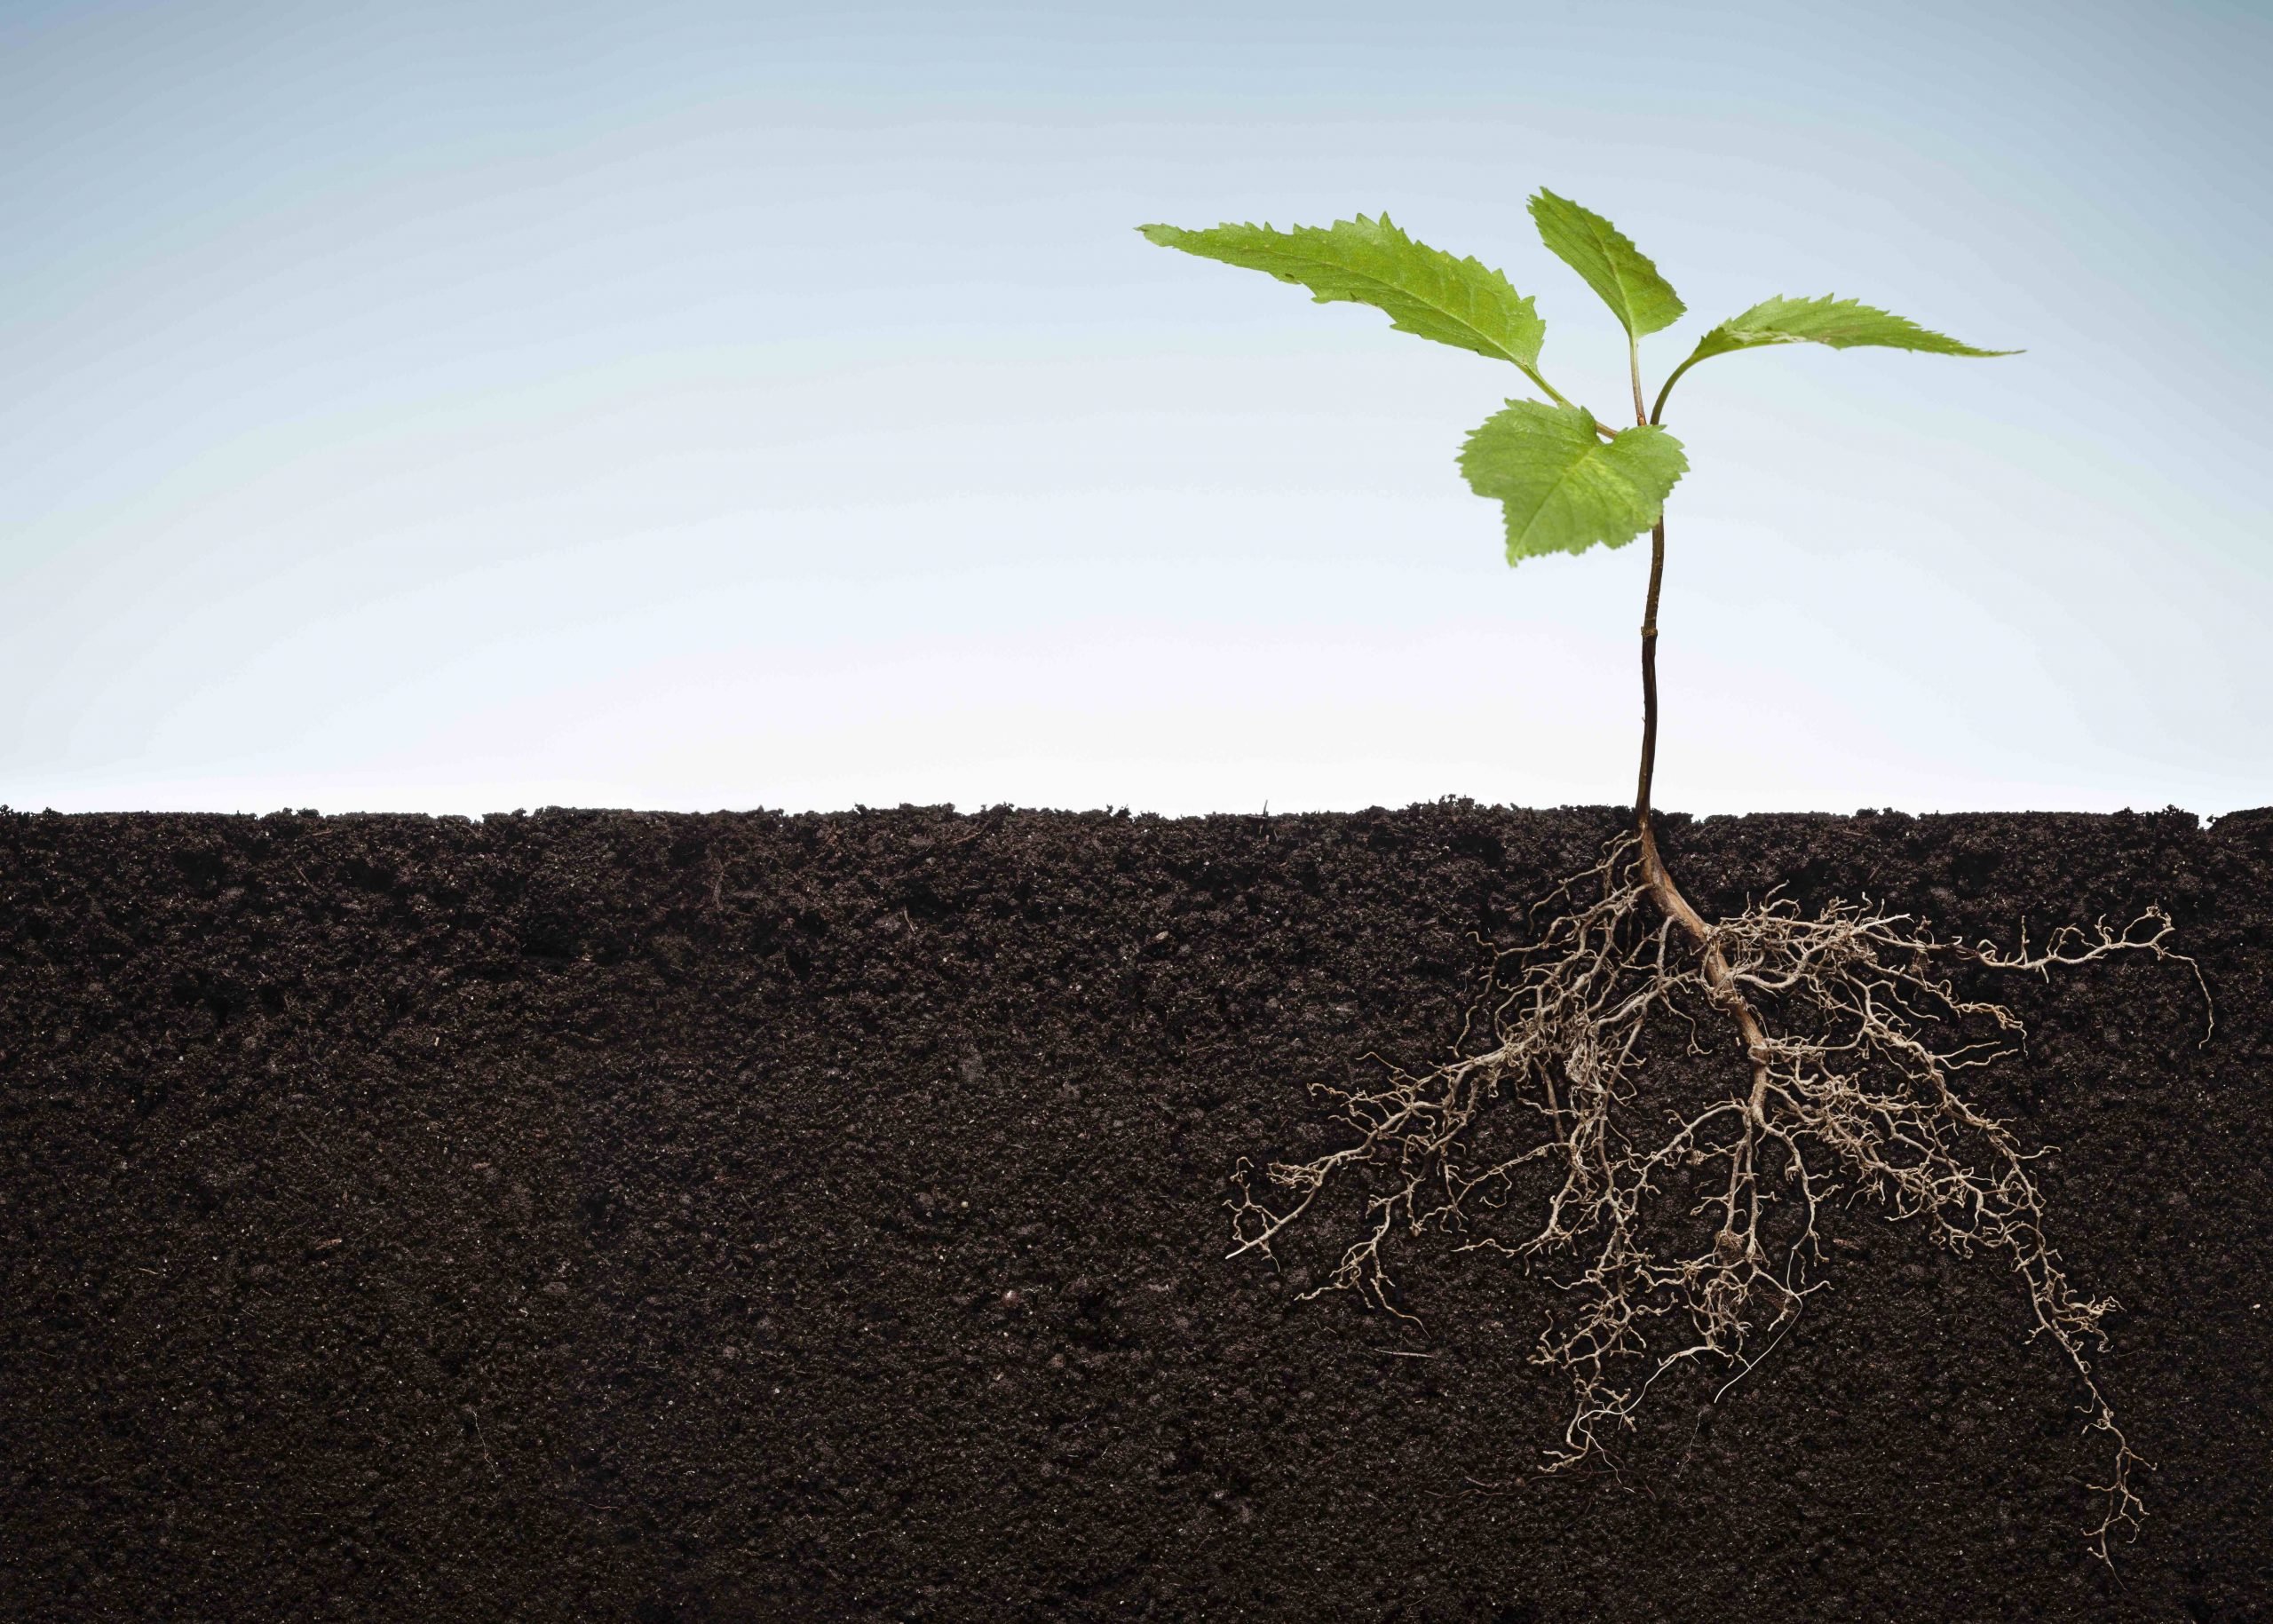 Soils have the potential to capture carbon. This image shows a plant growing in soil with its roots visible